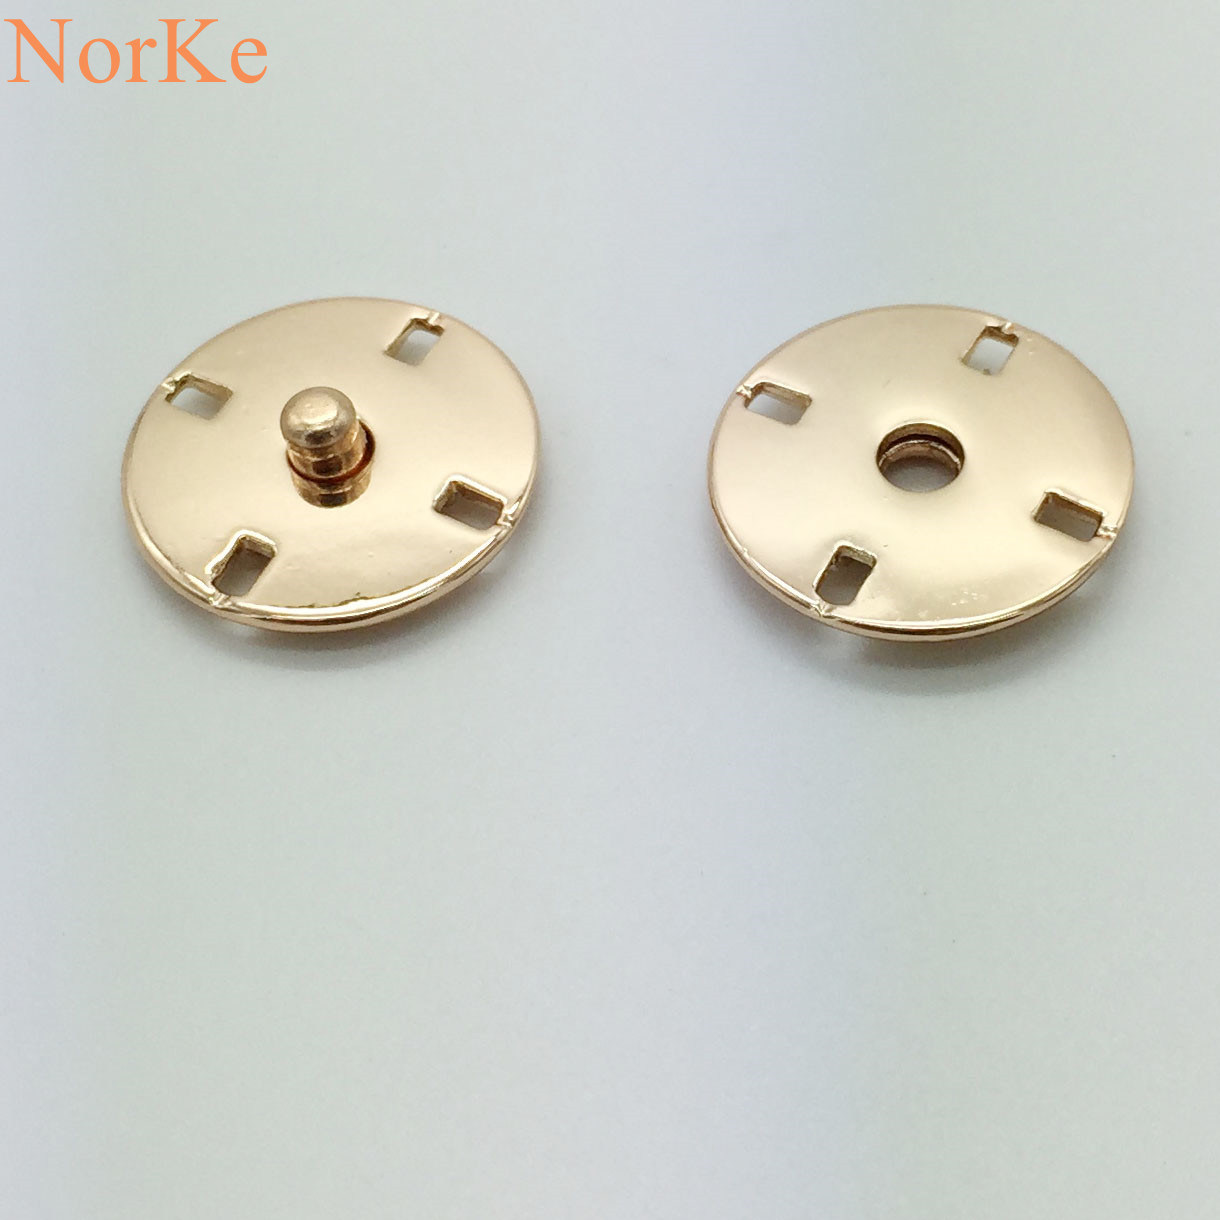 Alloy Snap Button Sewing on Fashion Coat Metal Button